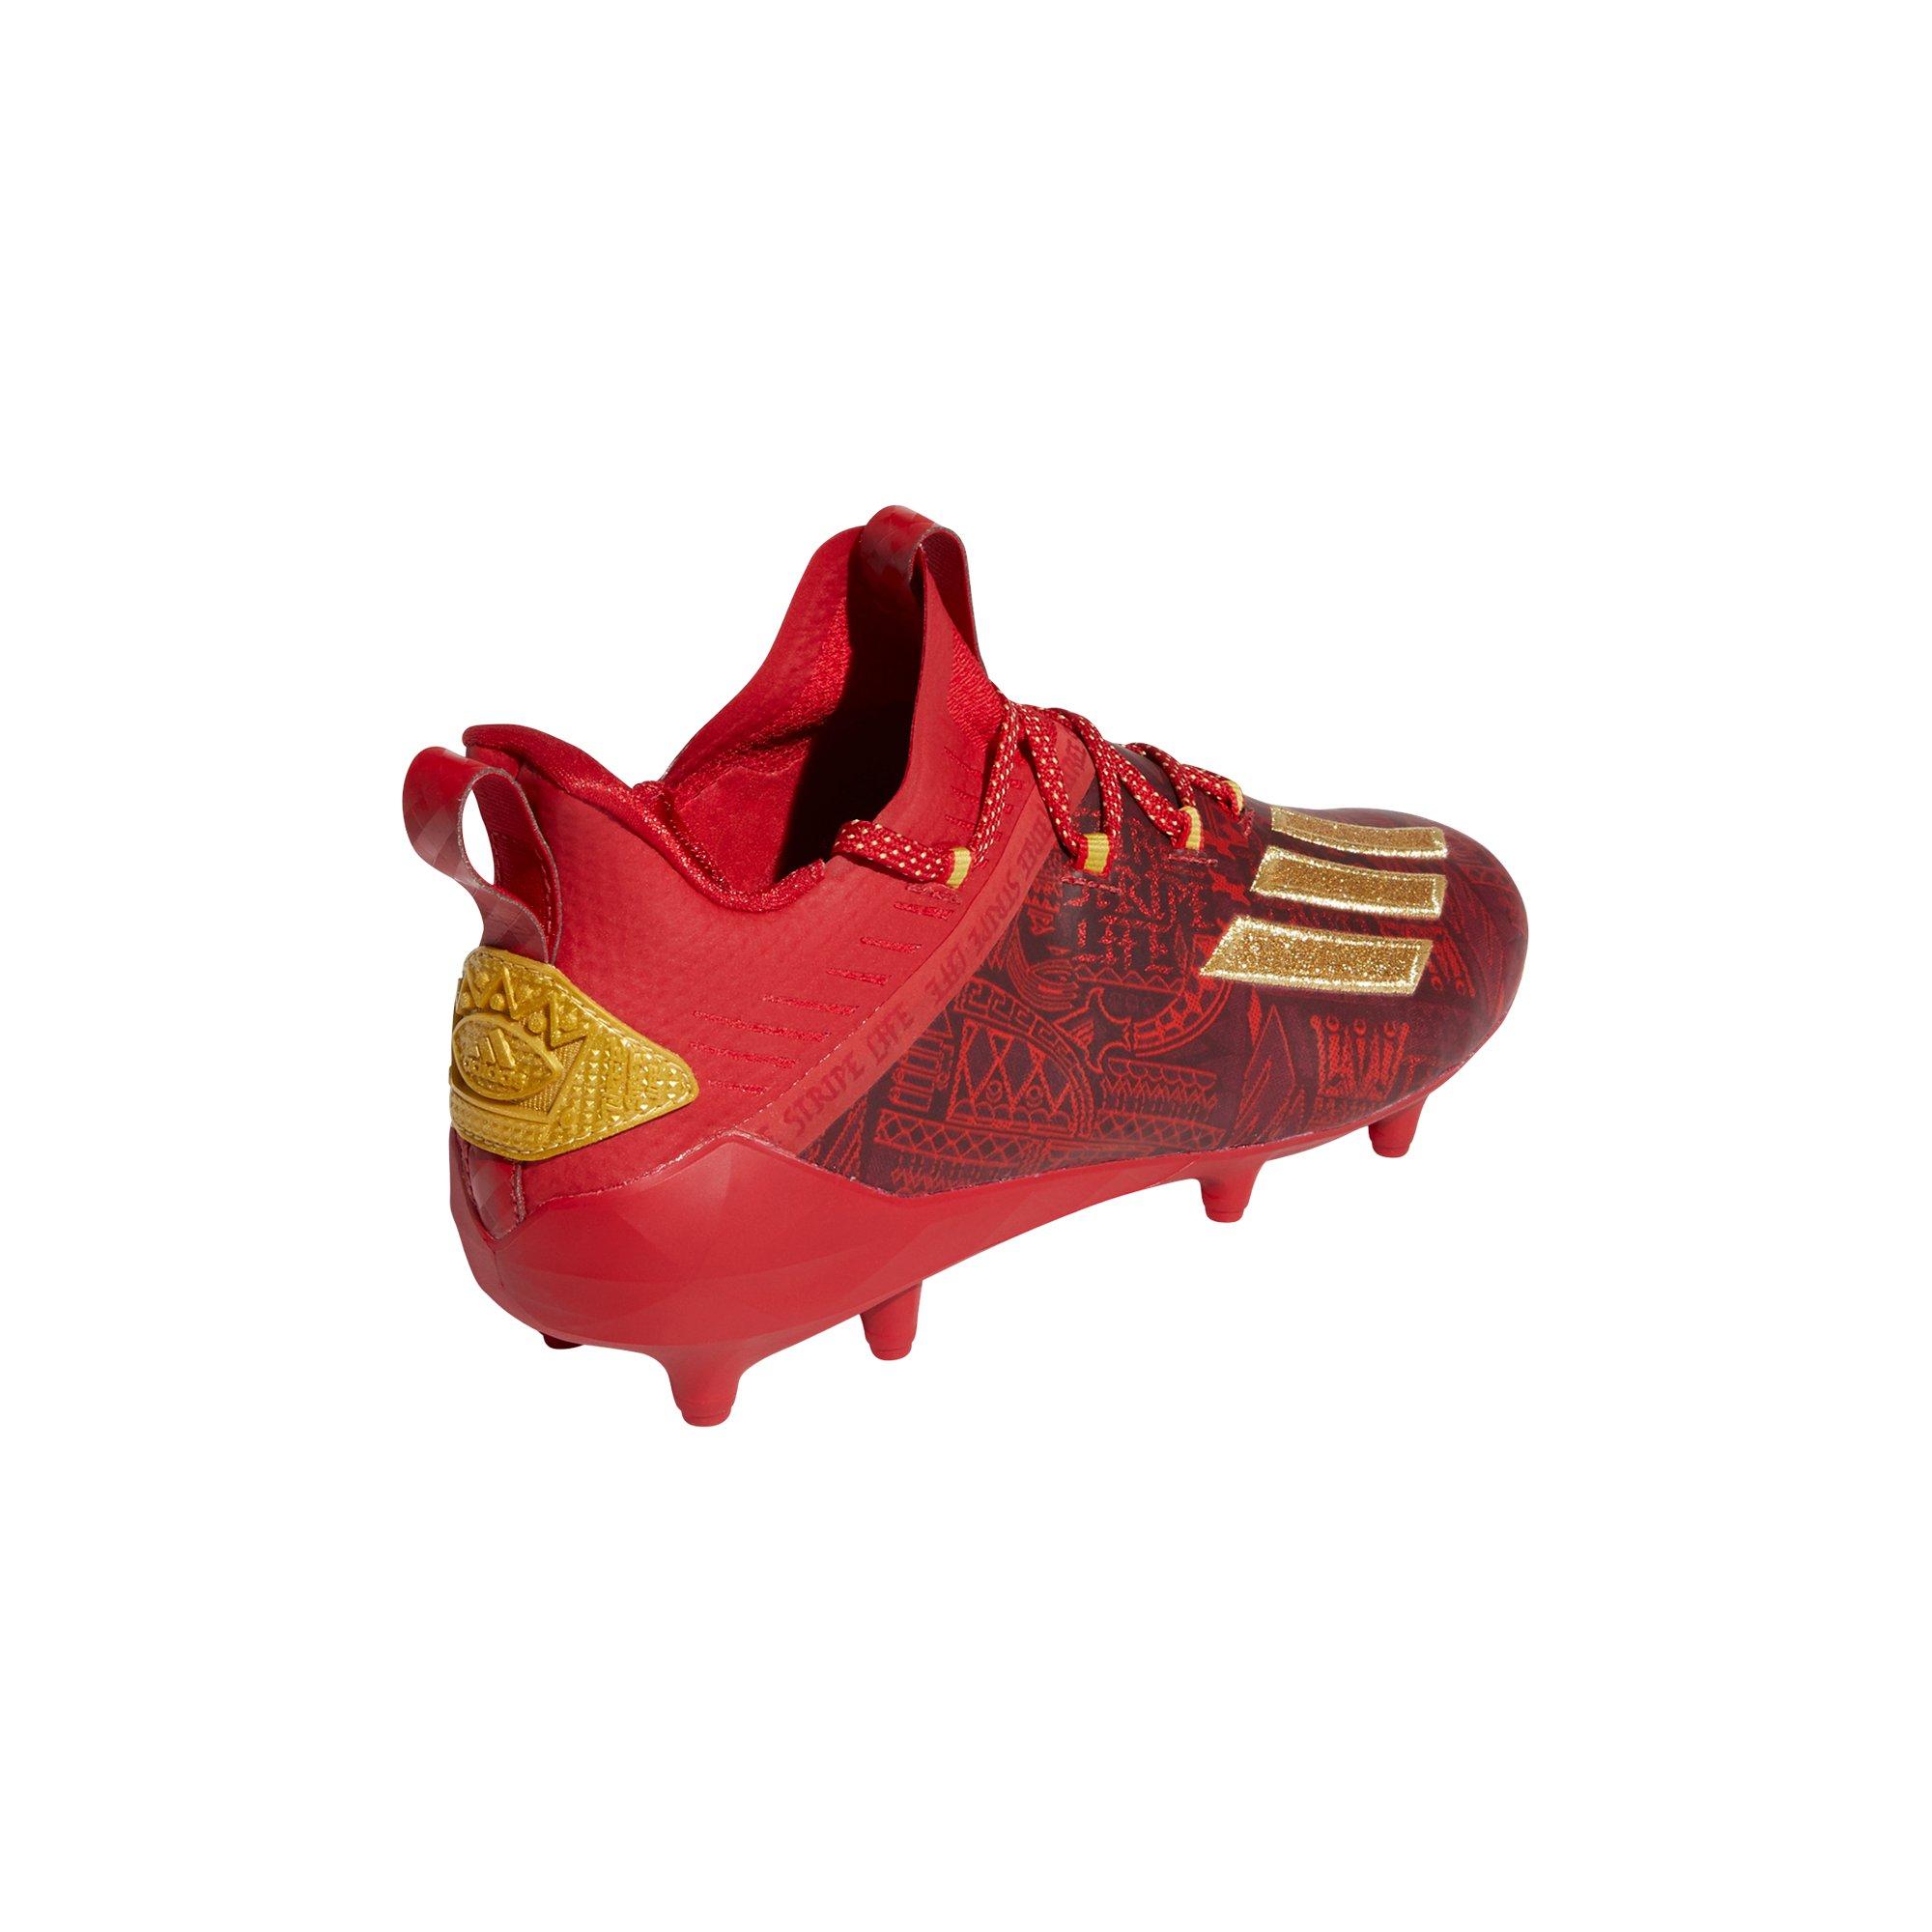 red and gold football cleats